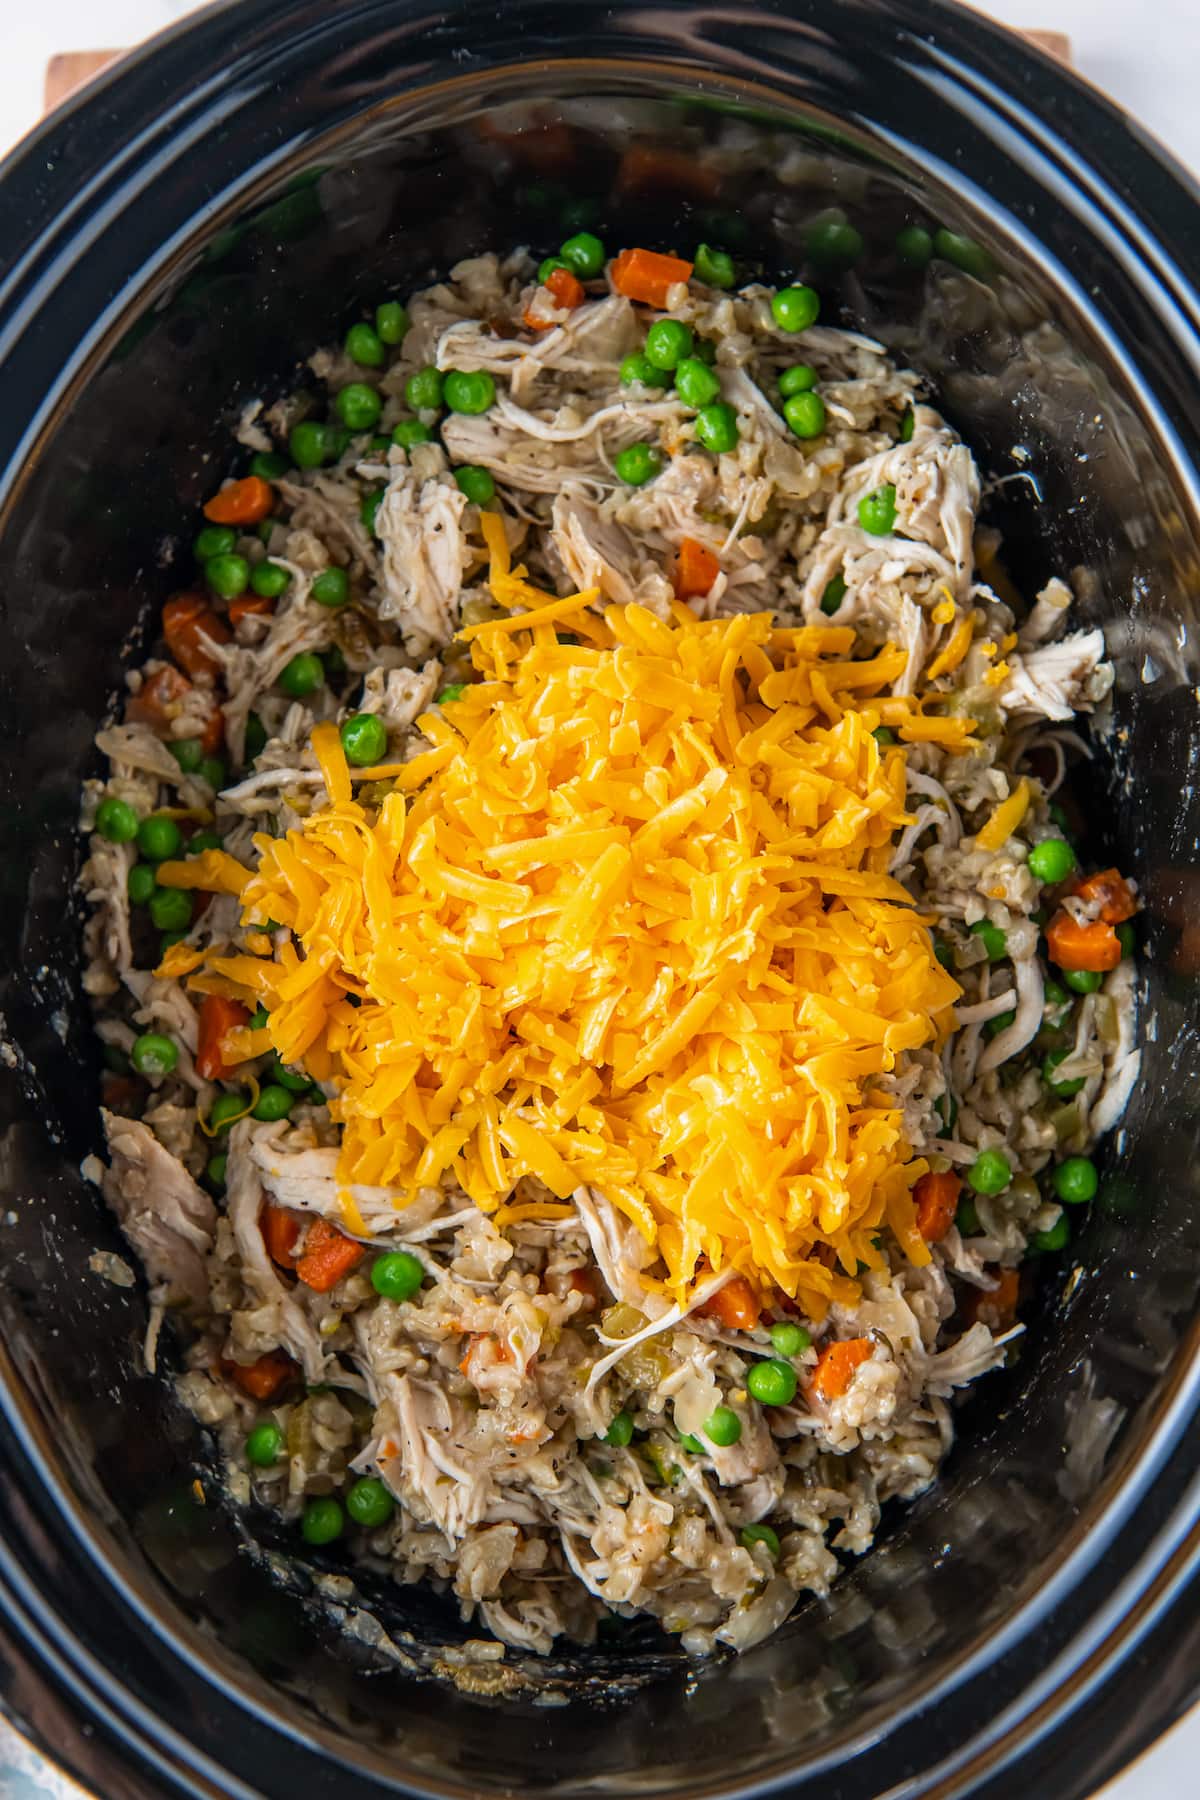 shredded cheese on top of chicken, rice, and vegetables in a crockpot